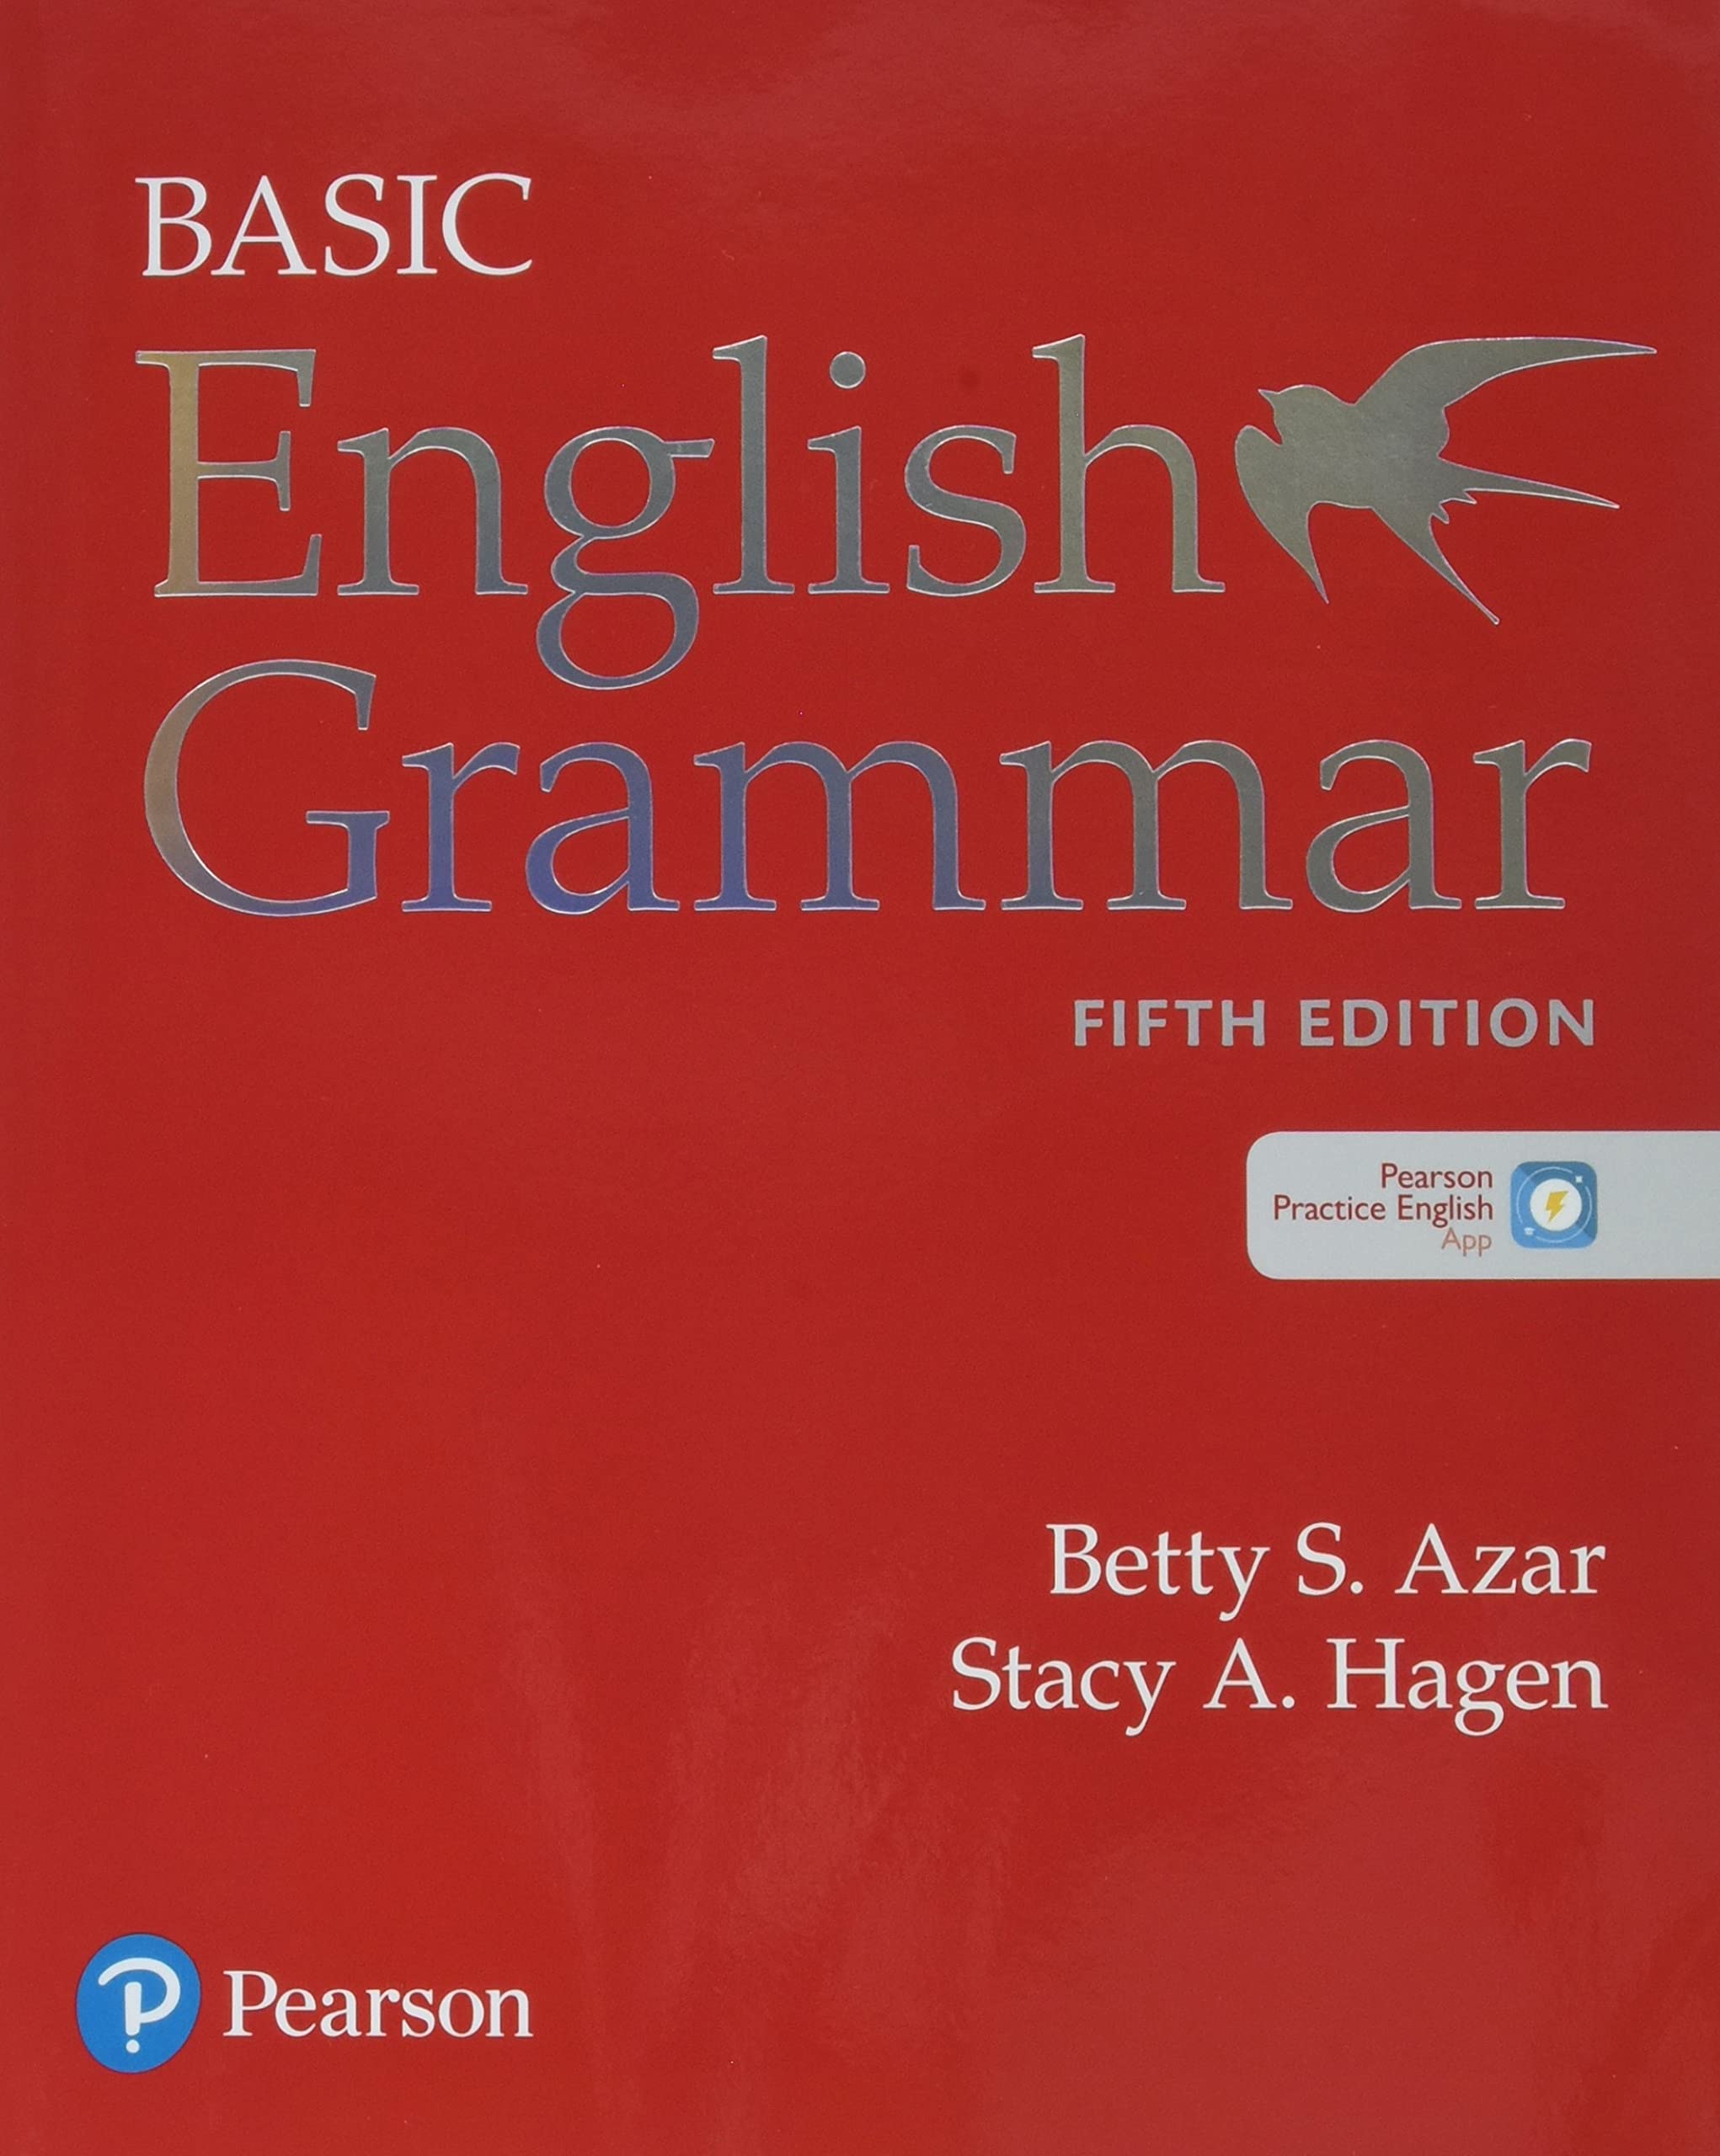 Basic English Grammar 5th Edition Student Book With App International Edition By Betty S